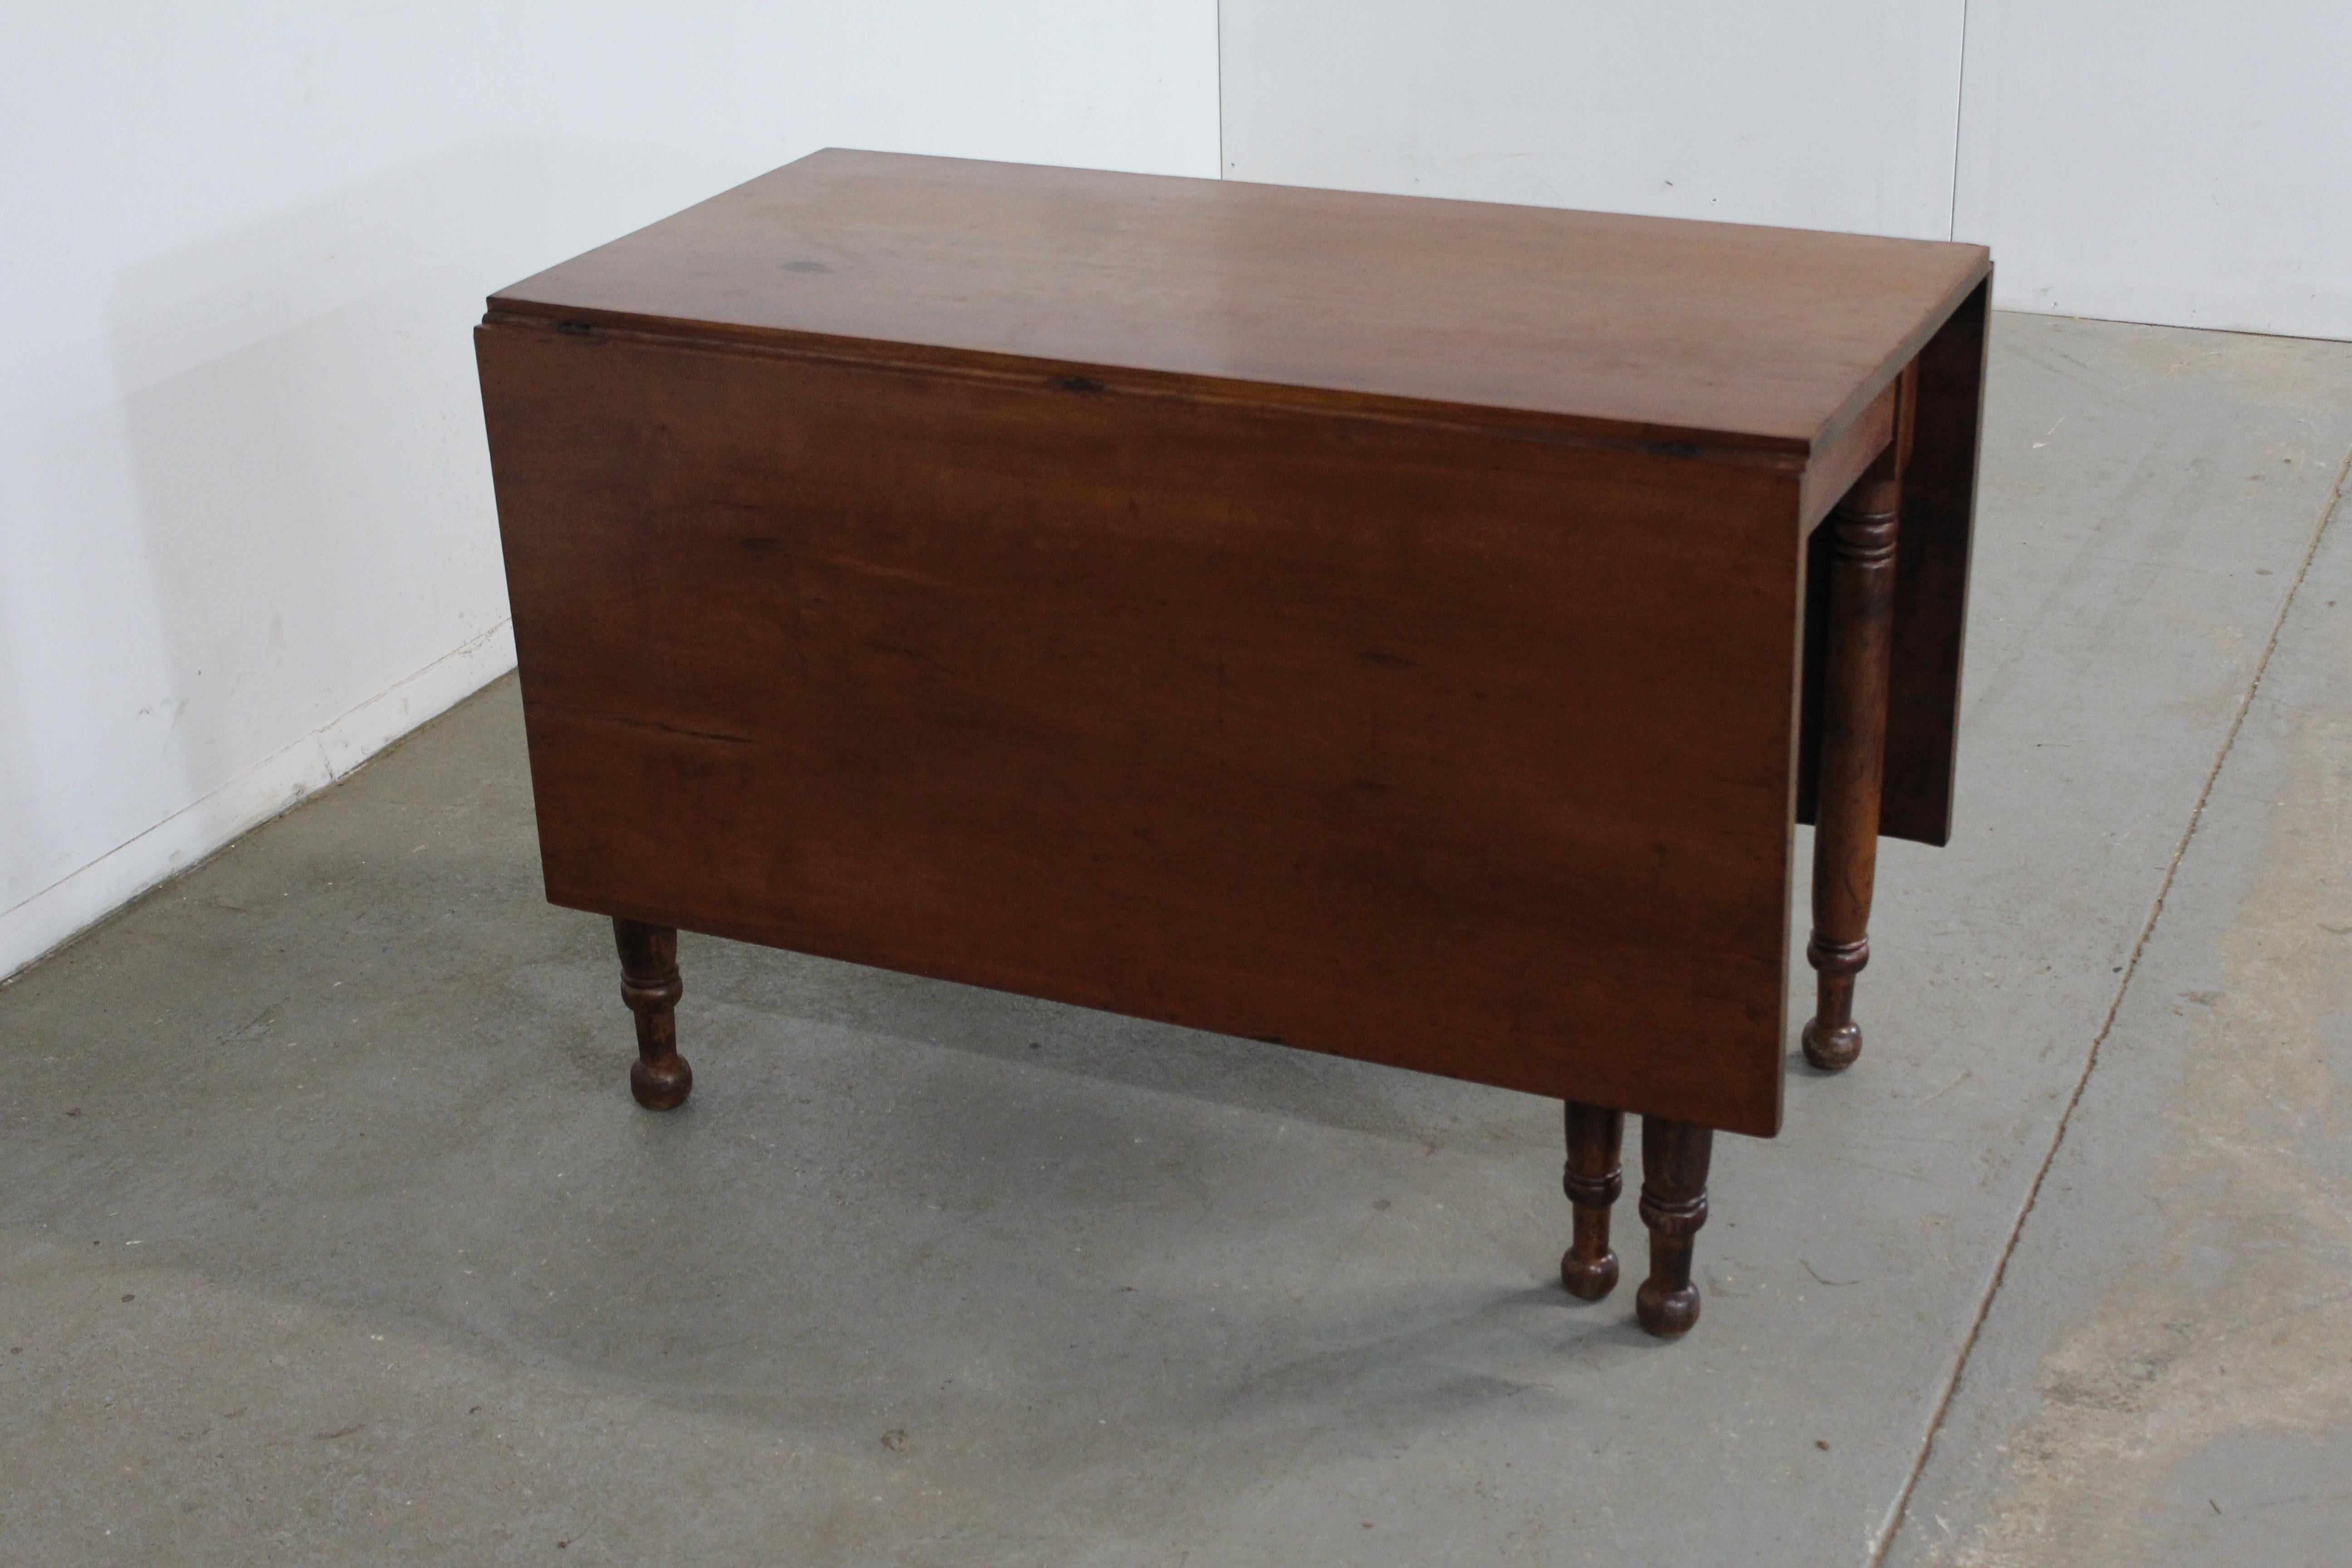 Antique Rustic walnut drop leaf table

Offered is an antique drop leaf table. The table is an excellent of Americana at its finest. Featuring solid Walnut and gate legs. The table can be used with two leaves up or if space is tight it can be pushed